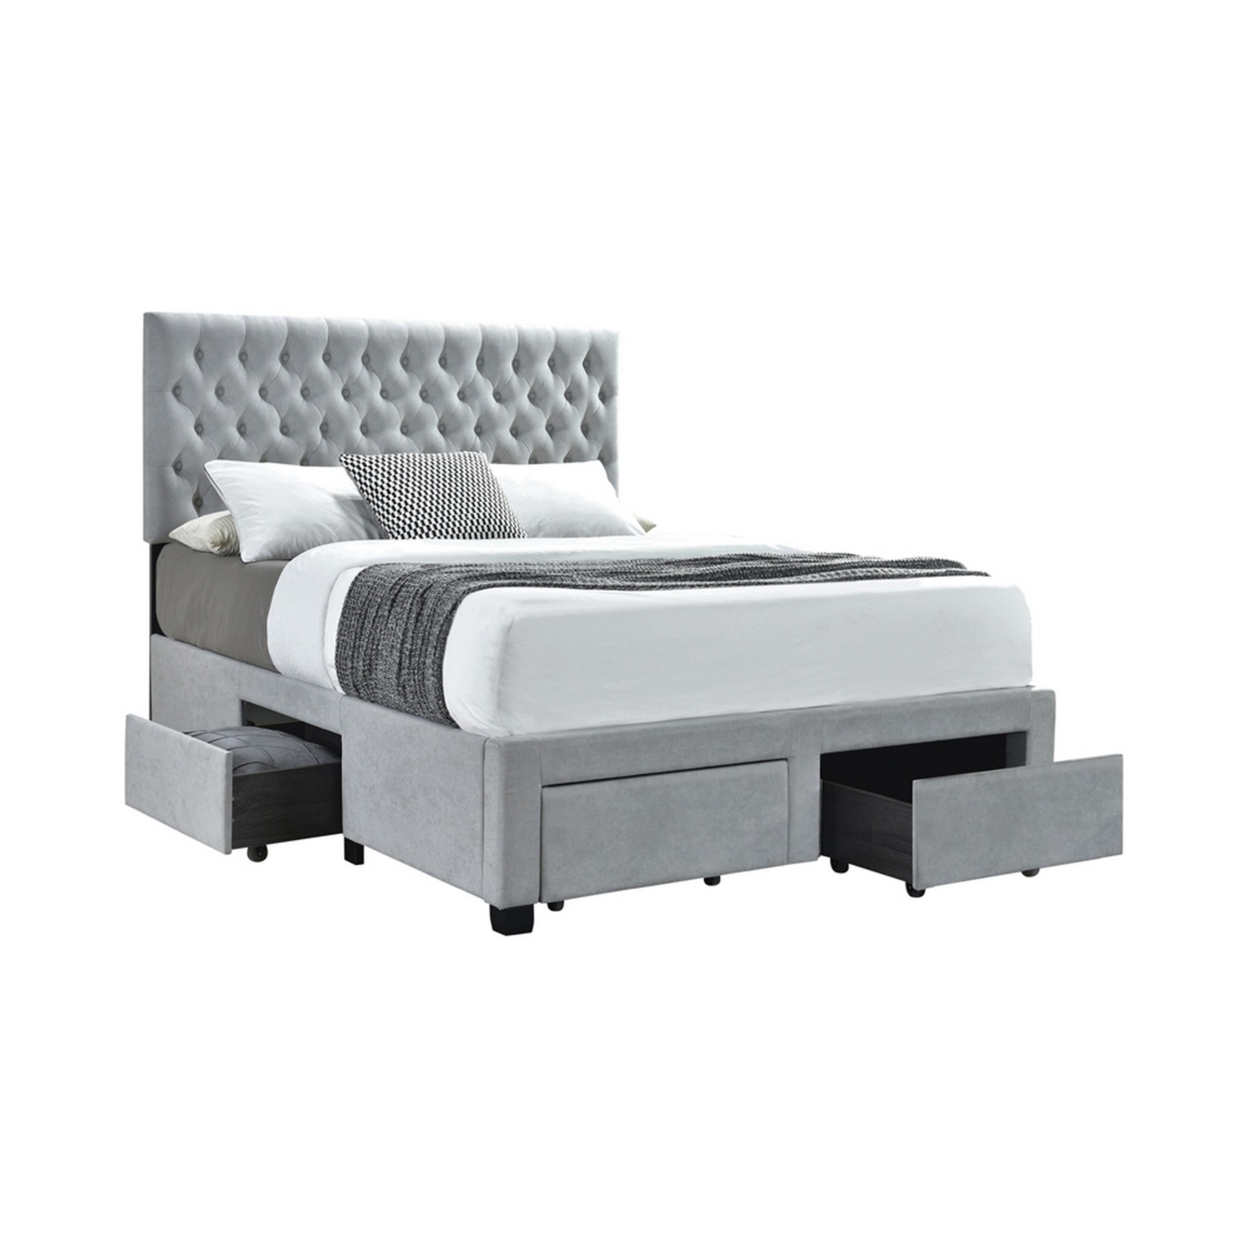 Fabric Upholstered Wooden Full Size Bed With Bottom Drawers, Gray- Saltoro Sherpi